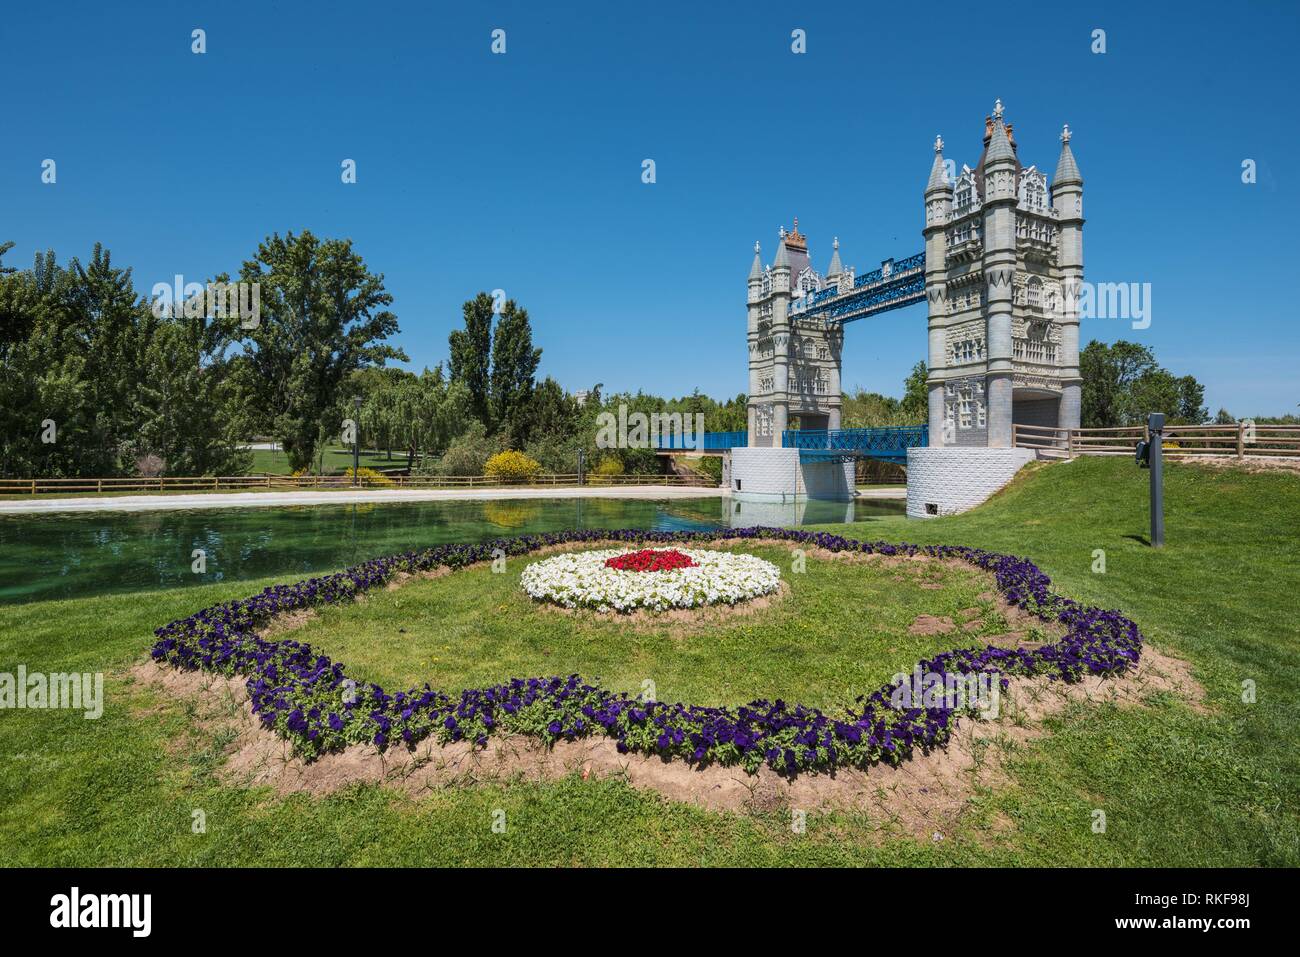 Europa park in Torrejón de Ardoz, Madrid, Spain. Its an urban park where are represented with scaled monuments the most famous european landmarks. Stock Photo